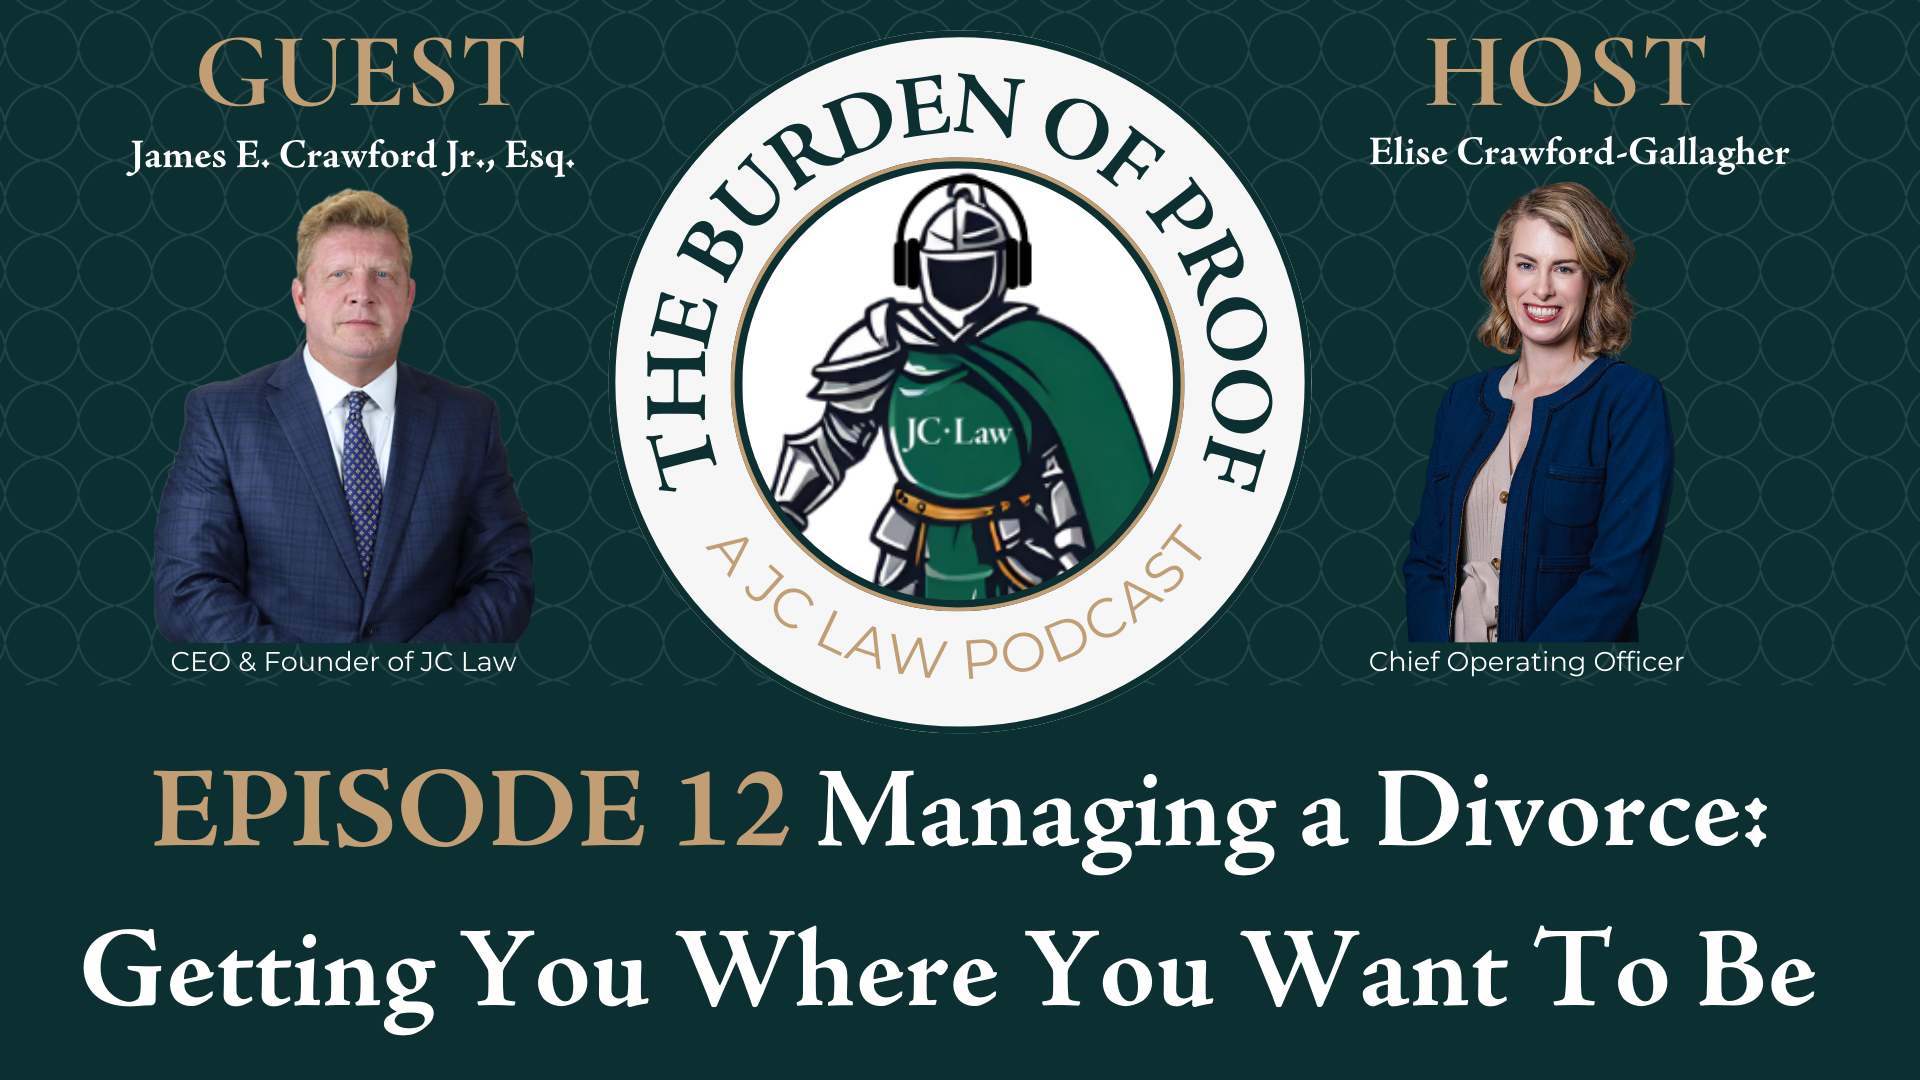 Episode 12 Managing a Divorce: Getting You Where You Want To Be